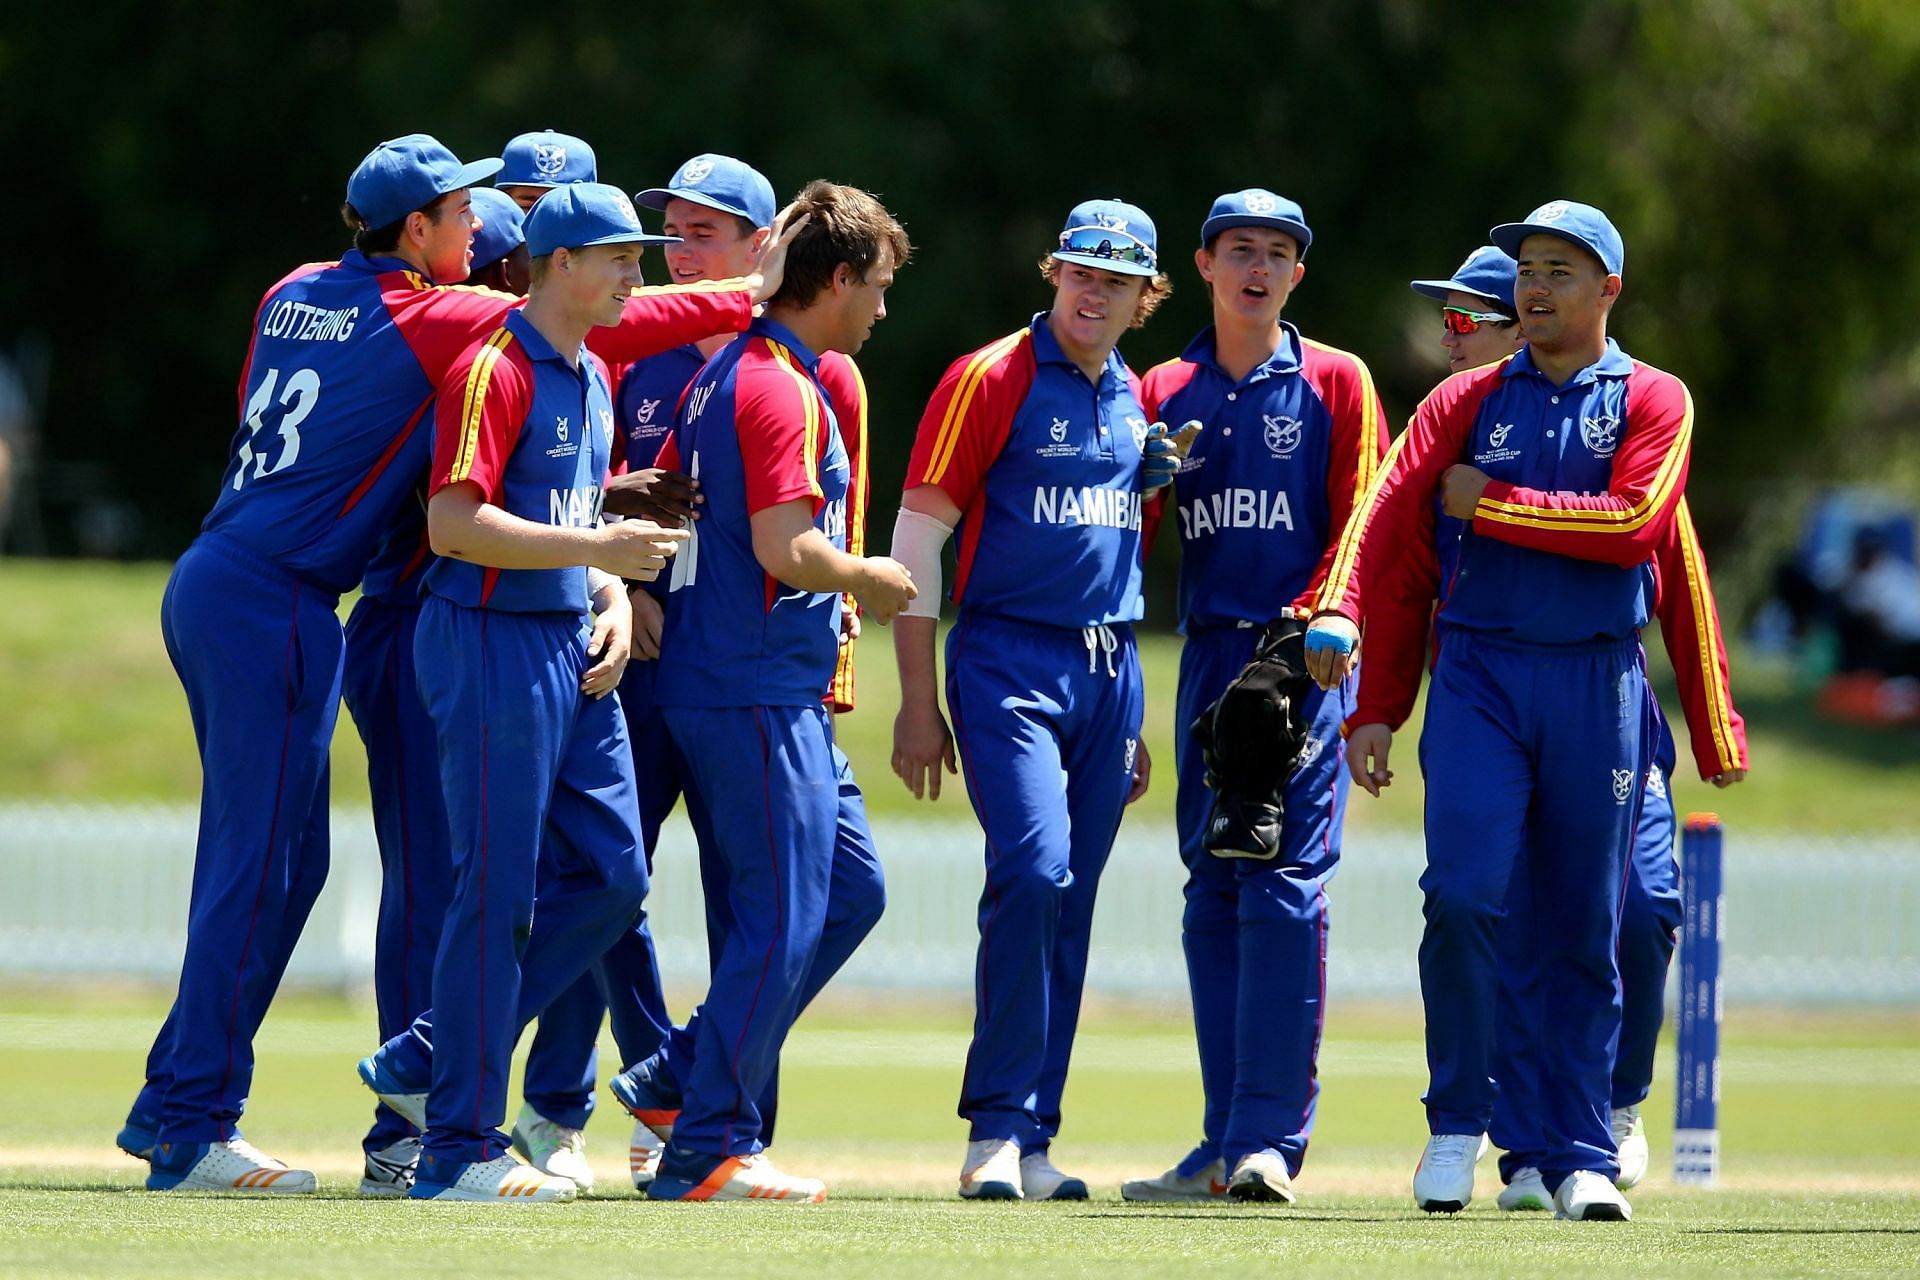 Namibia Cricket Team (Image Courtesy: T20 World Cup)